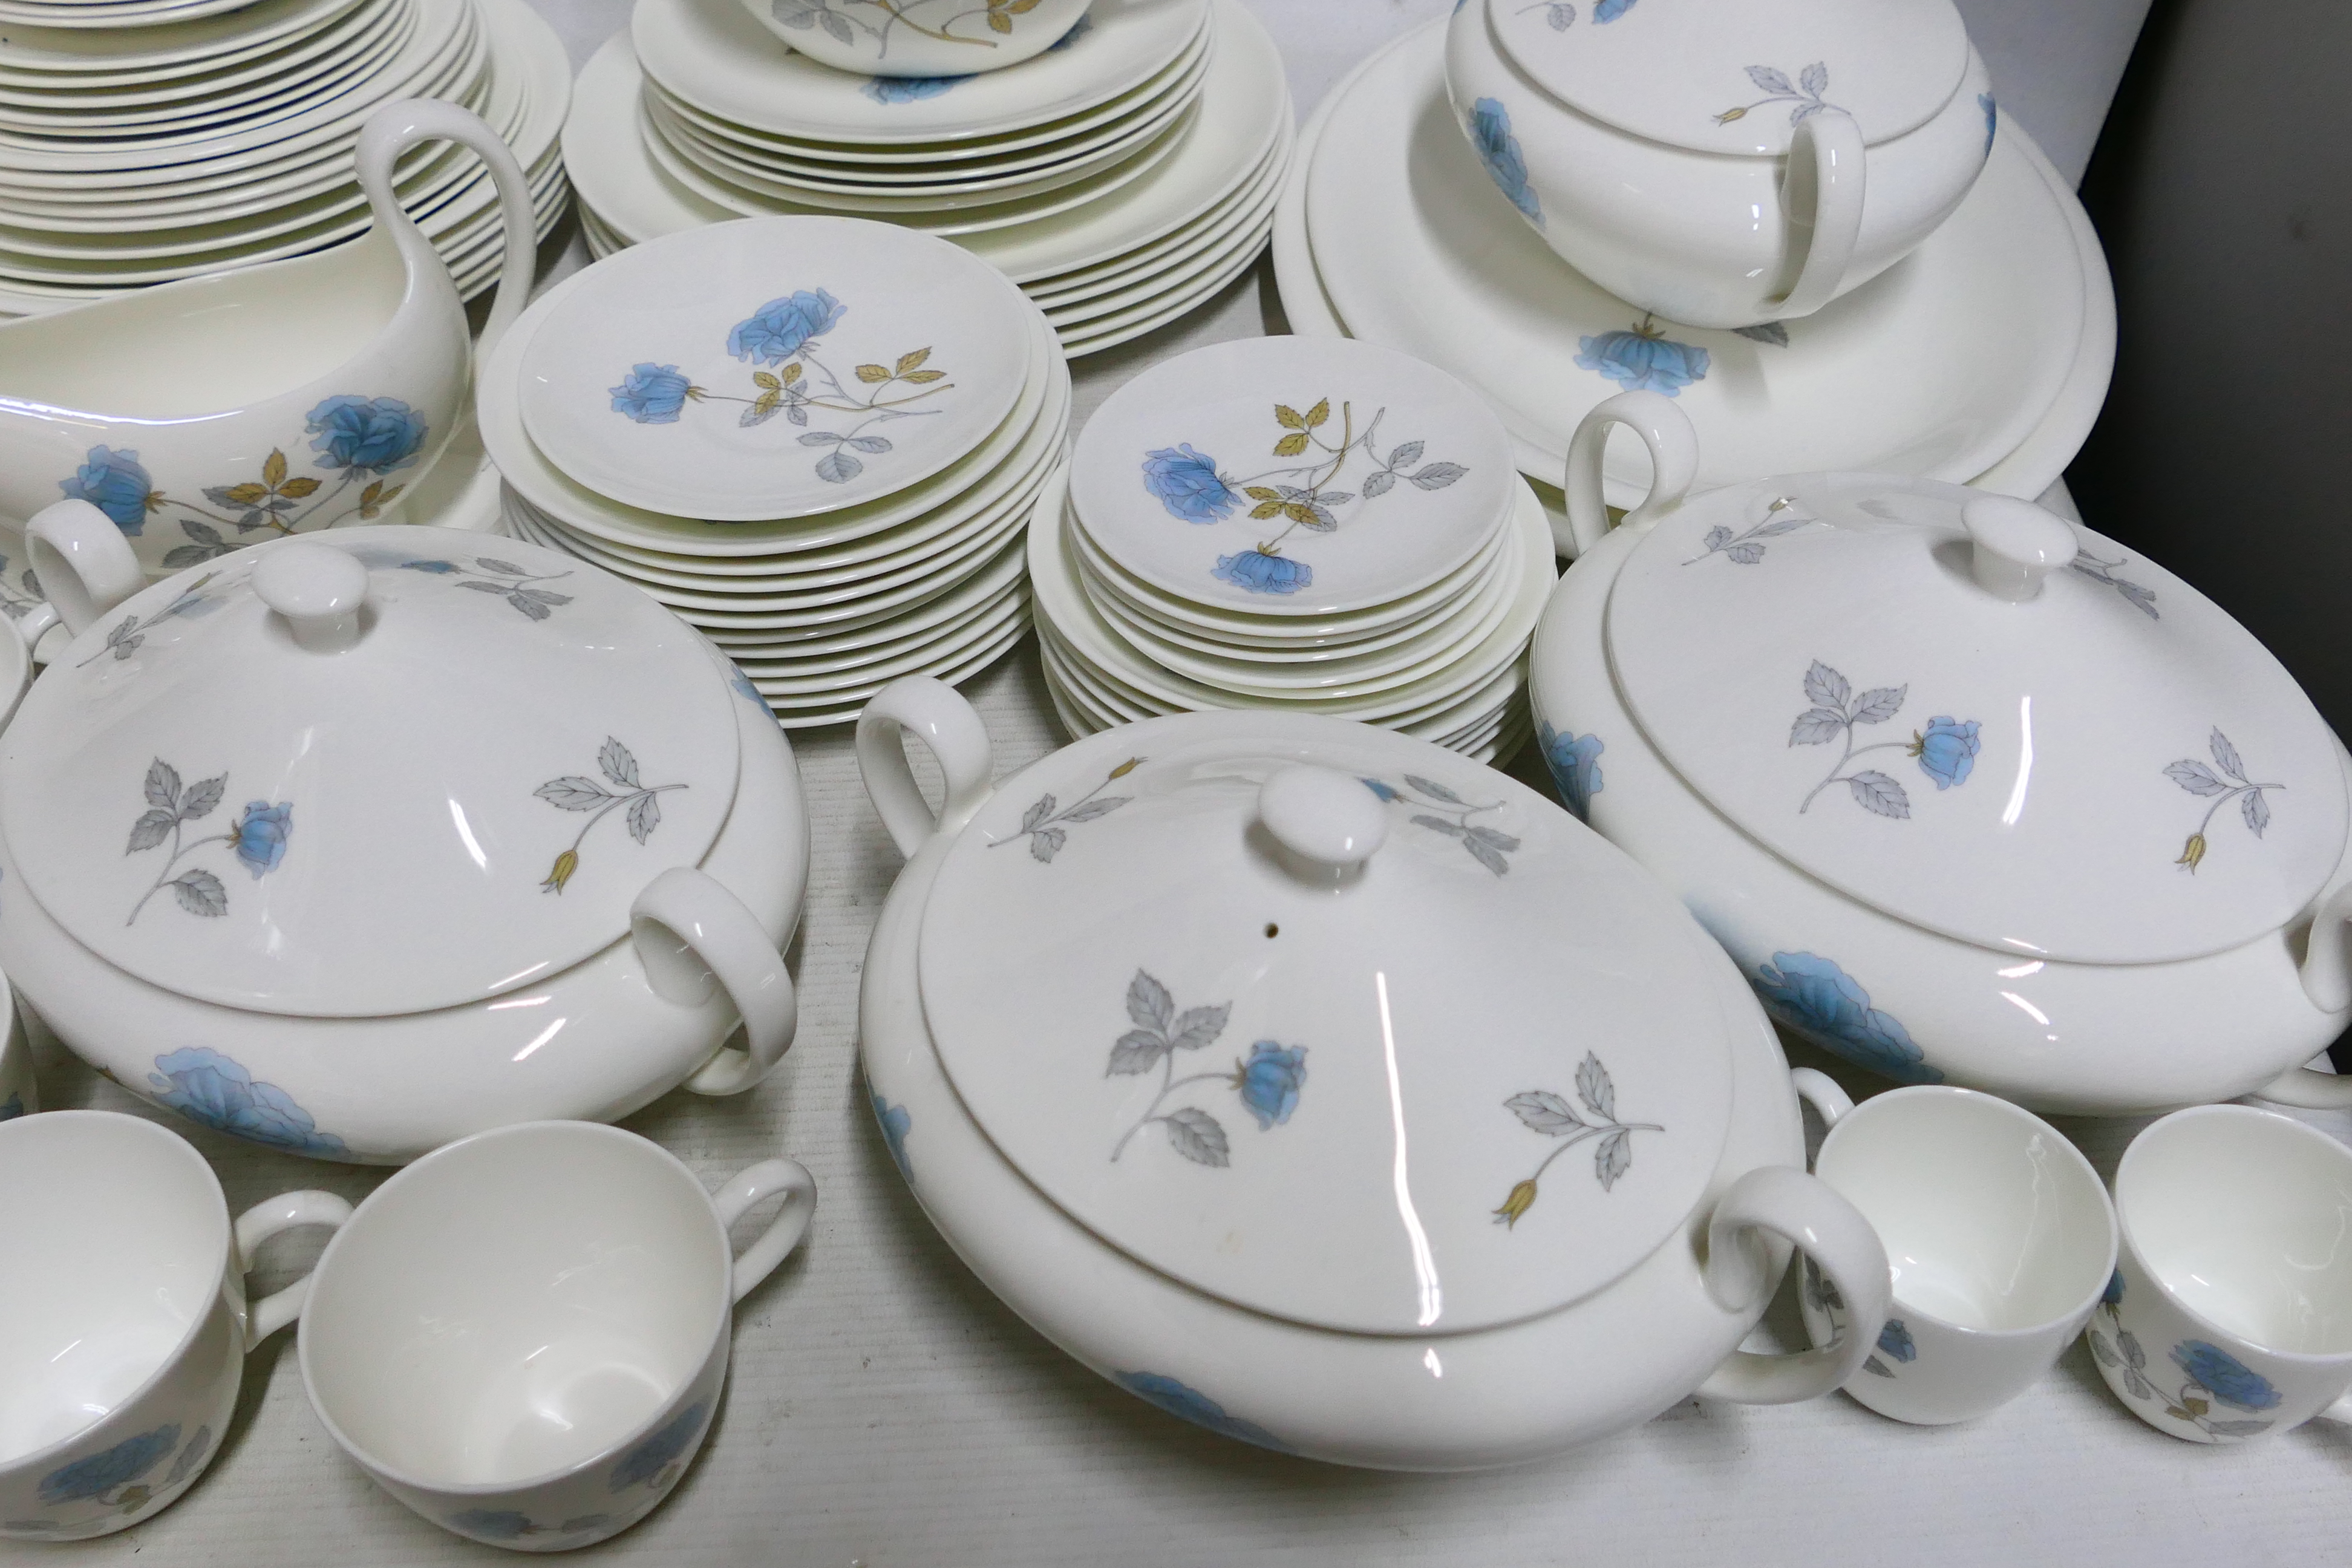 Wedgwood - A large Wedgwood Ice Rose dinner/tea set - Pieces include soup bowls, cream jugs, - Image 6 of 10